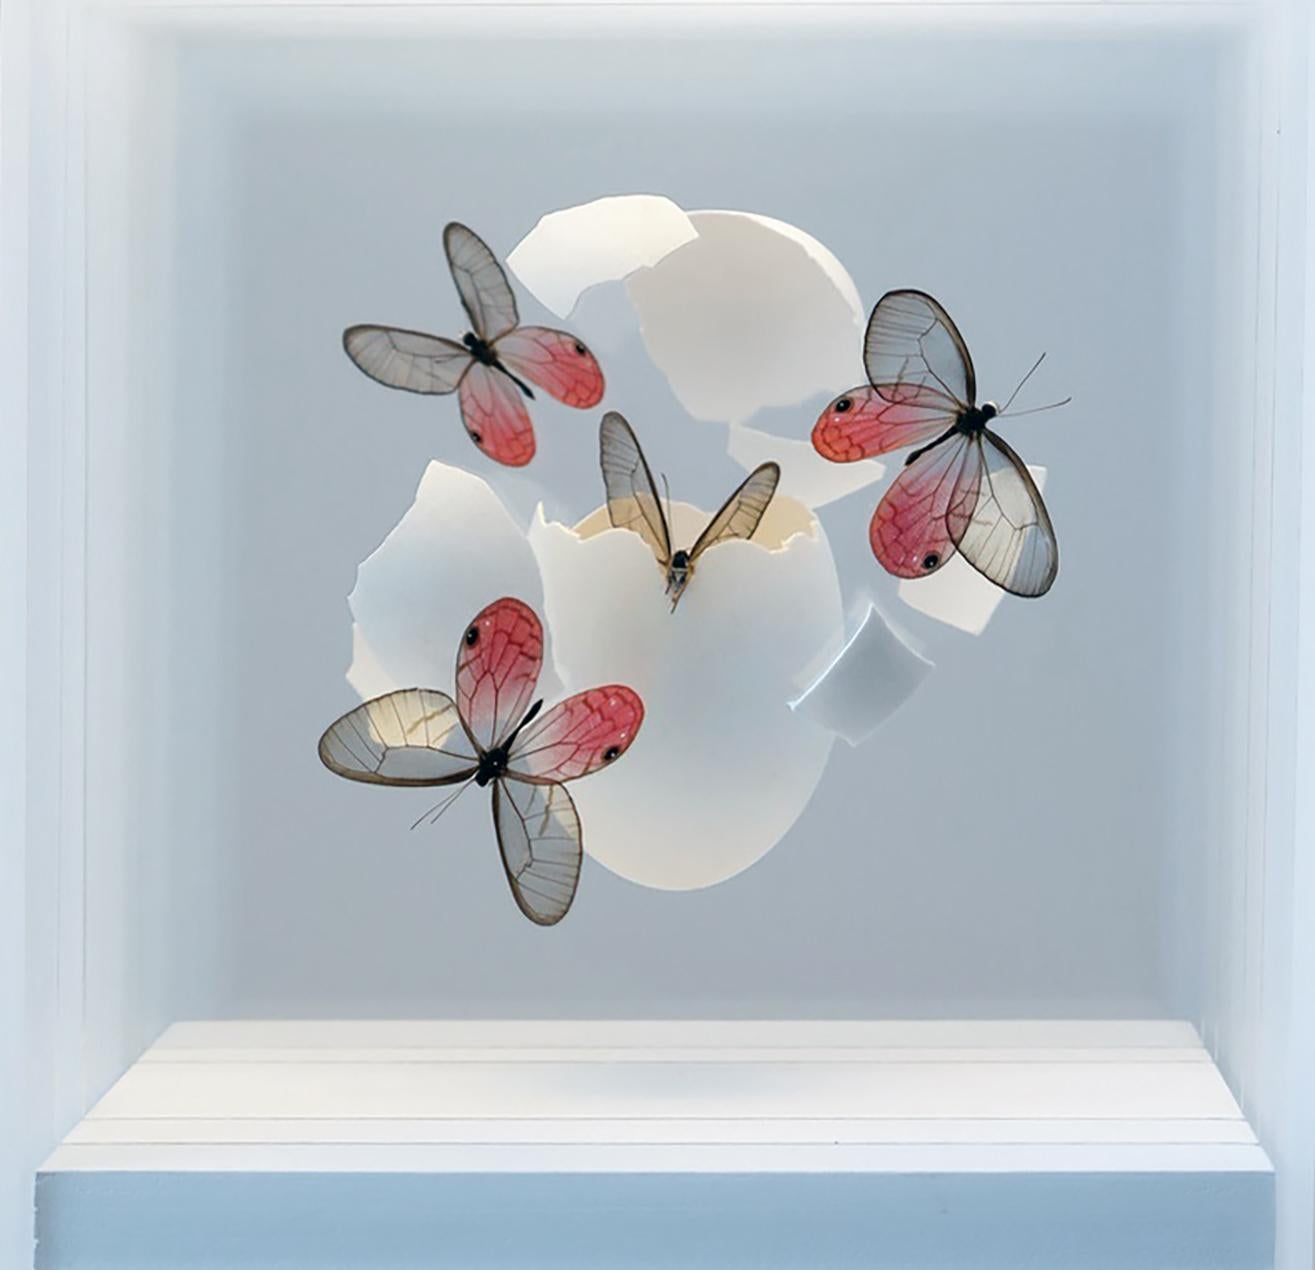 Impact 141 - 21st Cent, Contemporary, Installation, Mixed Media, Butterfly, Egg - Mixed Media Art by Jean Luc